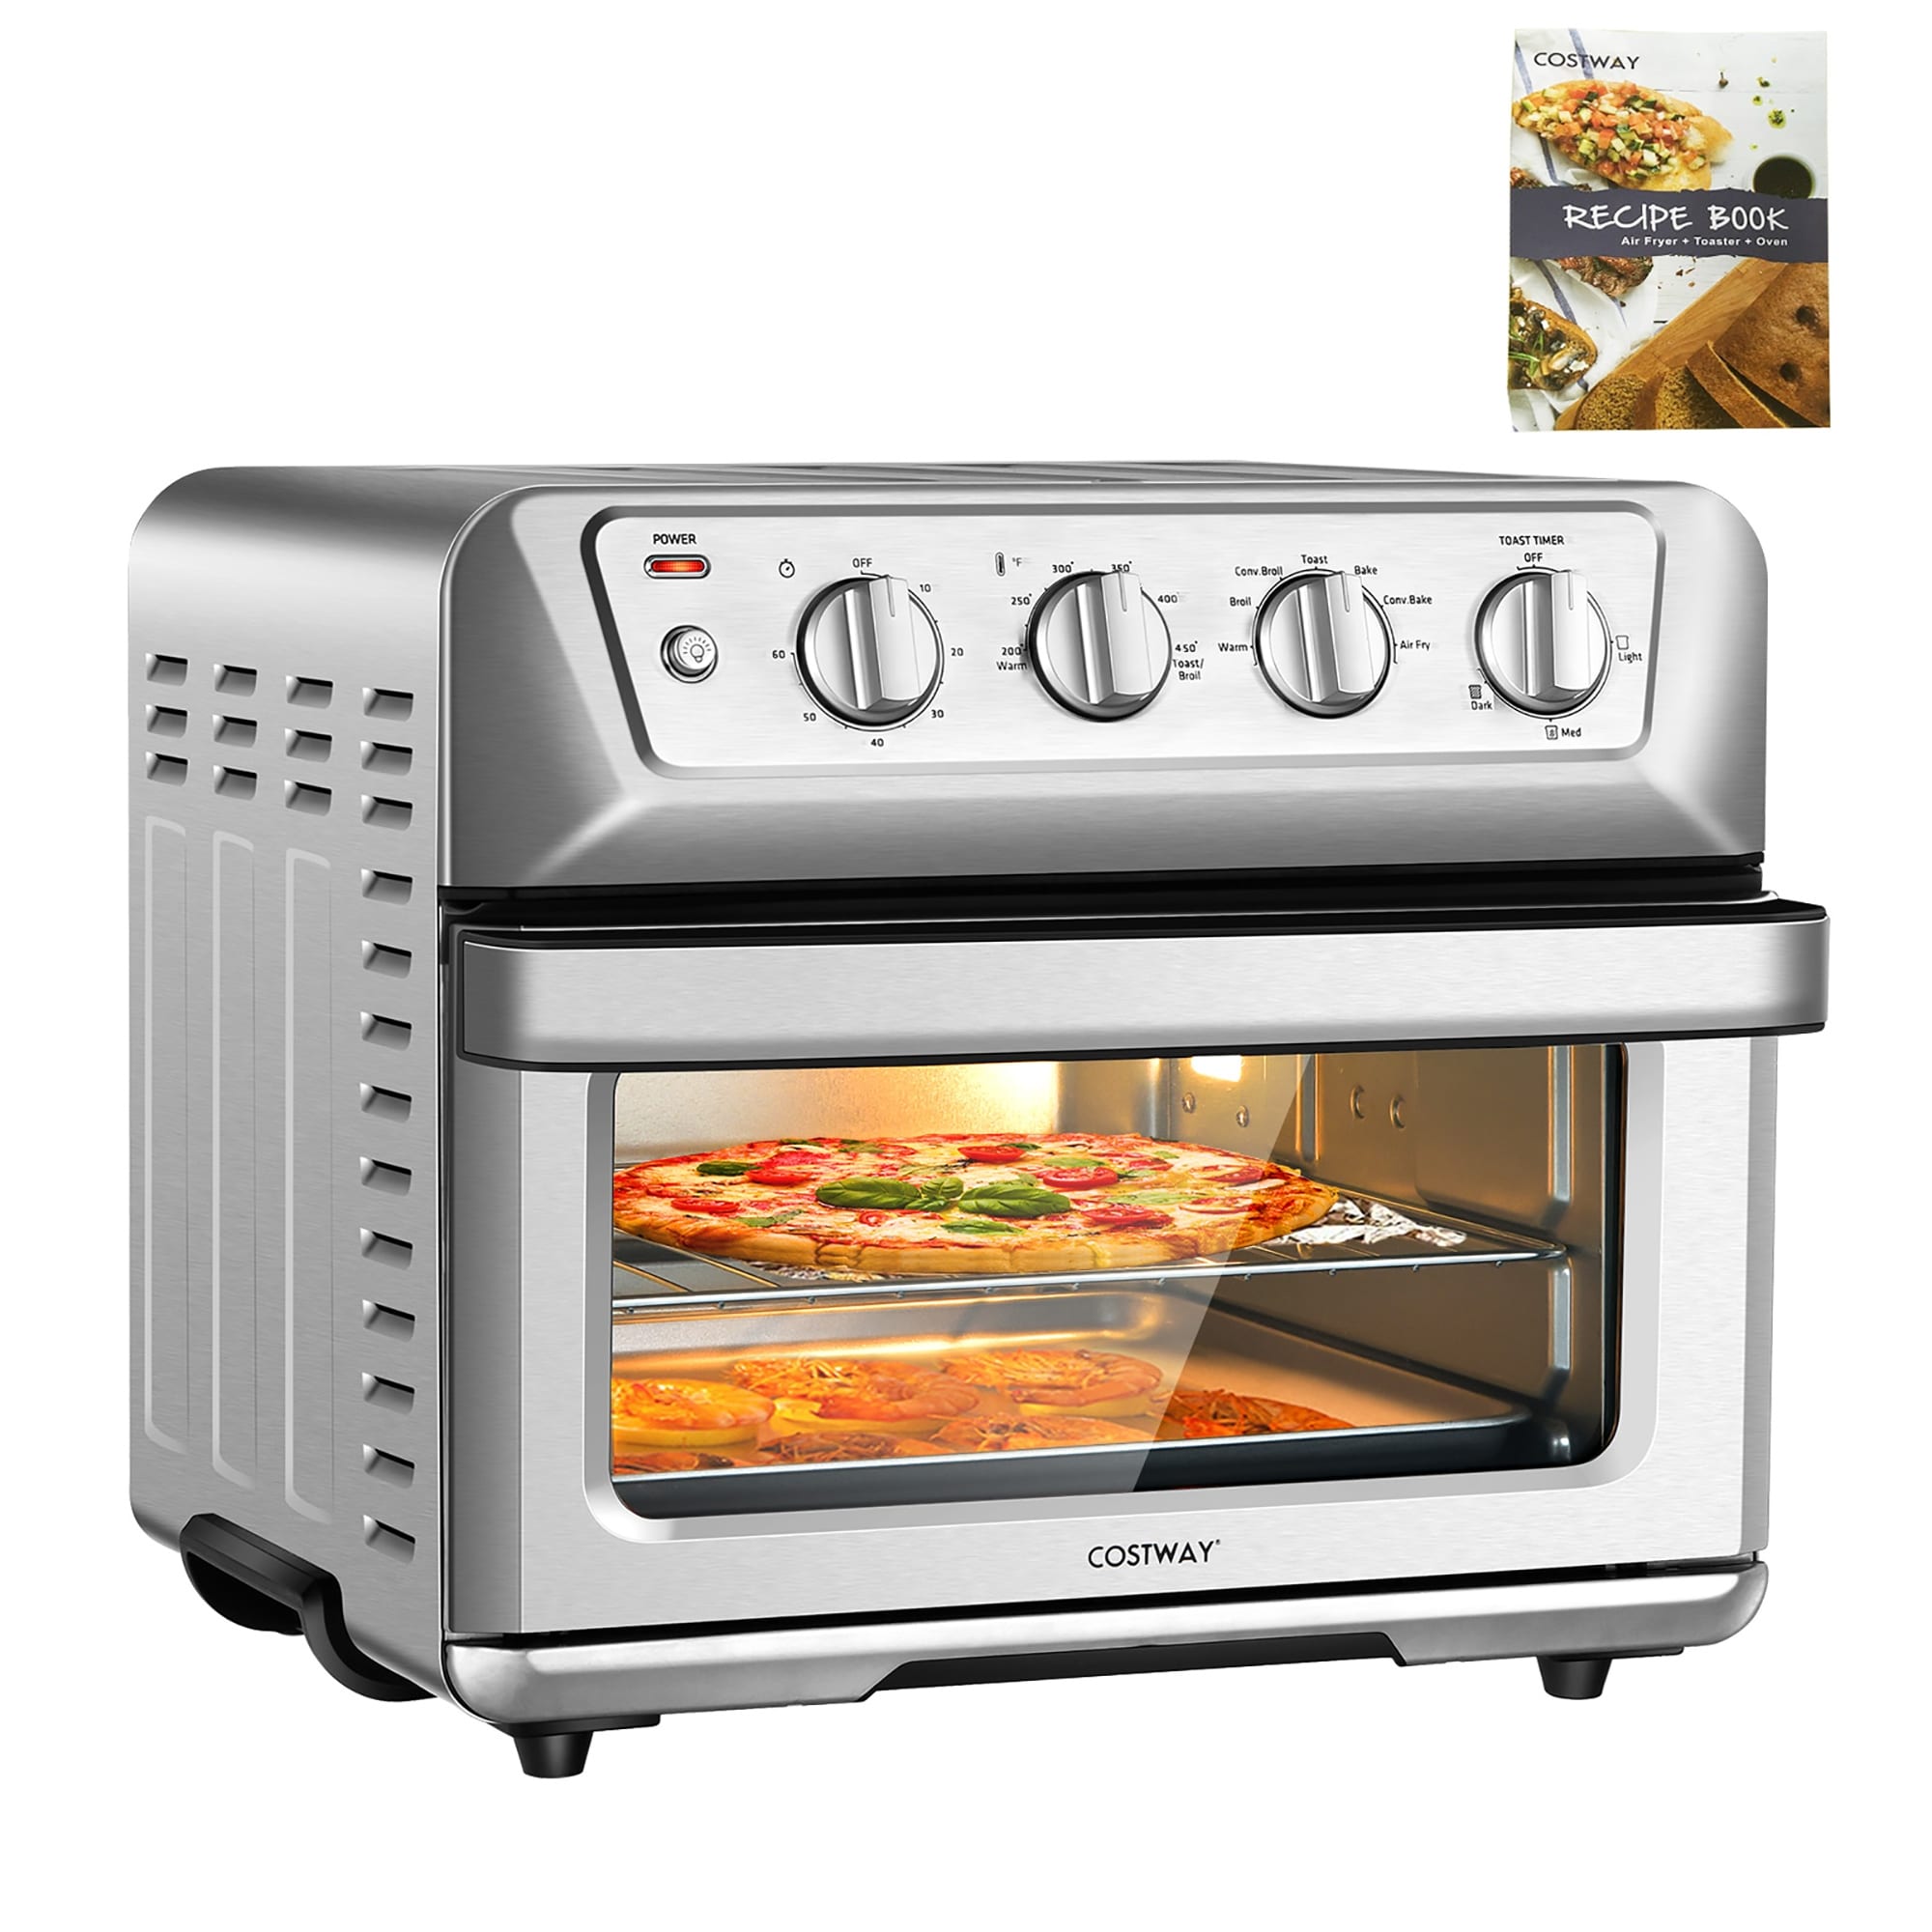 Chef Air Fryer Toaster Oven Combo,16QT Convection Ovens Countertop